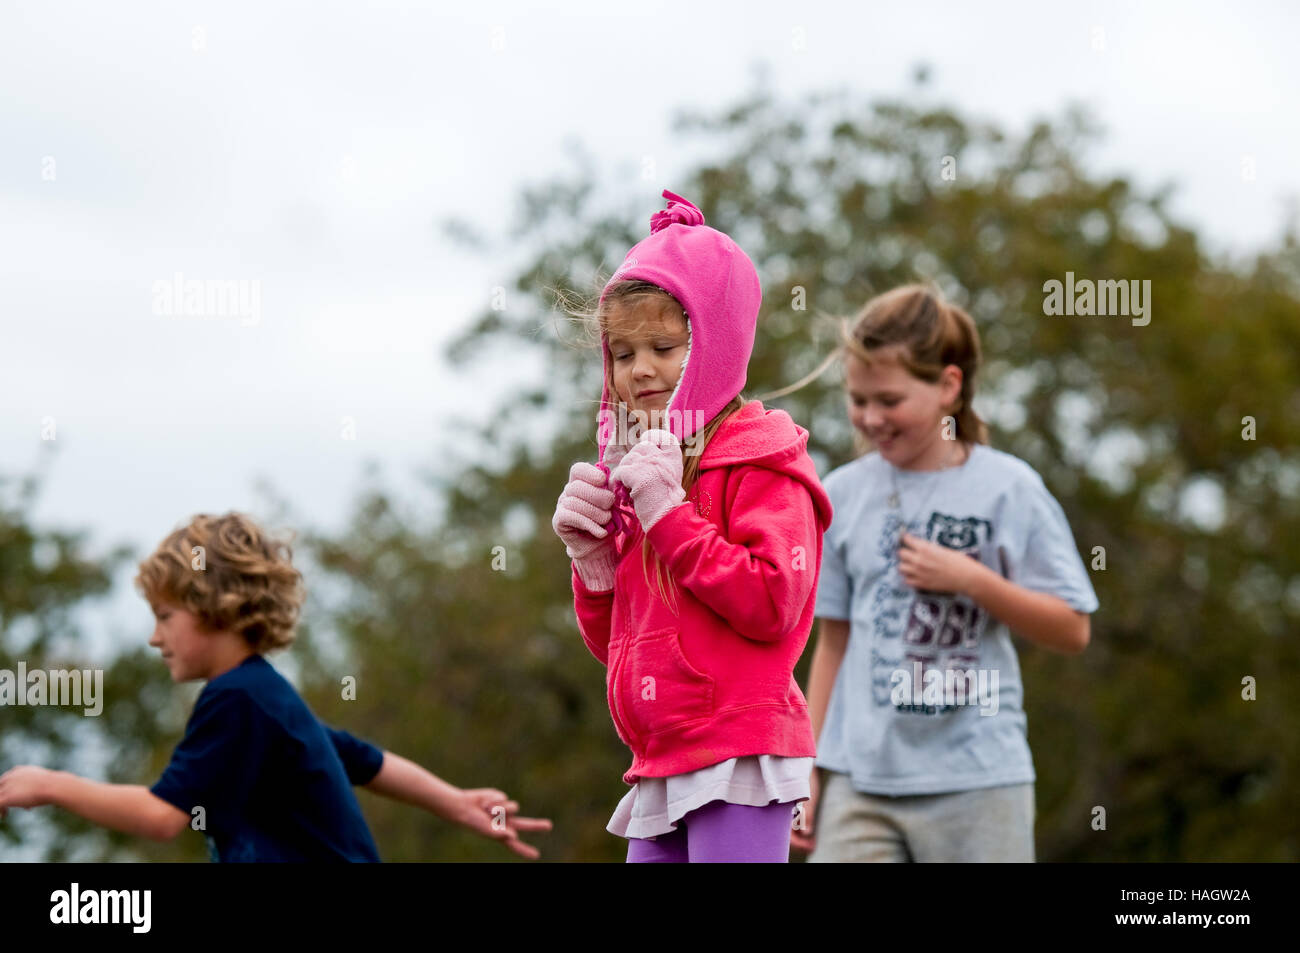 Happy Little girl bundled in pink winter clothes on a windy day with friends in background. Stock Photo